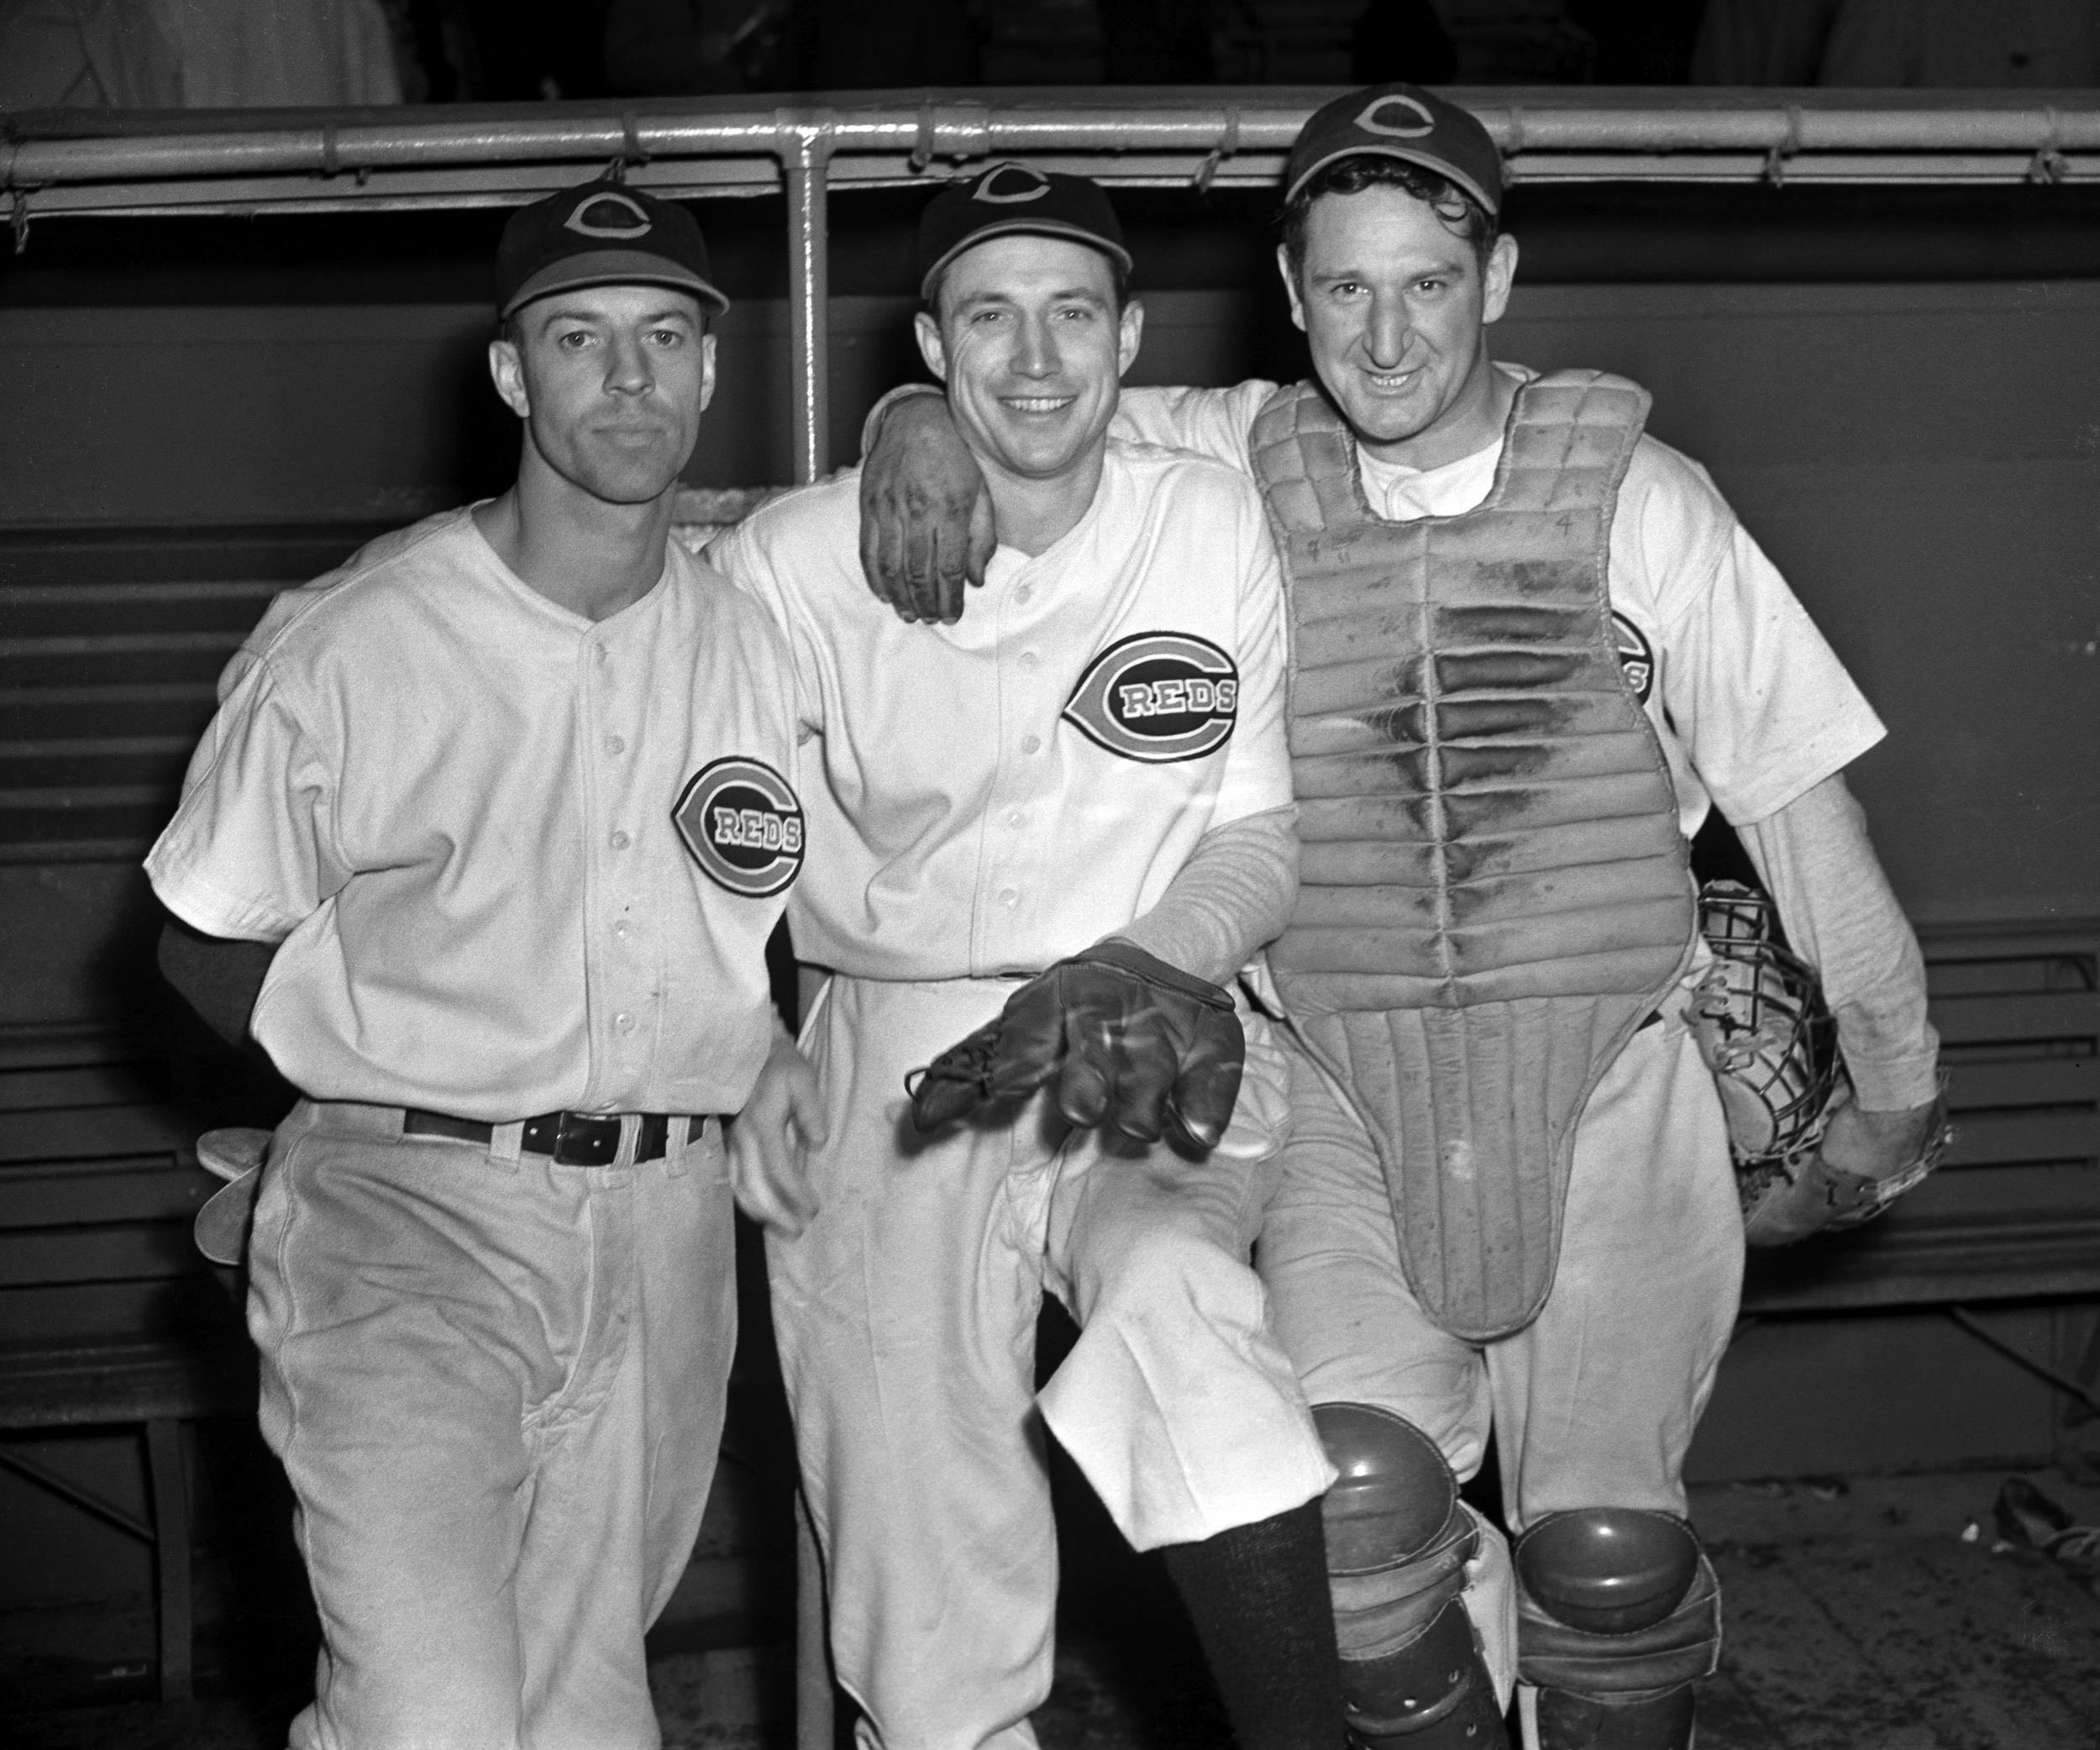 <p>Werber’s career was a bit better than Gaston’s, though they were contemporaries and surely crossed paths. The third baseman’s best trait was his speed. Werber led the American League in stolen bases three different times and won a World Series with the Reds in 1940.</p><p>You may also like: <a href='https://www.yardbarker.com/entertainment/articles/to_the_nines_21_iconic_movie_dresses_092623/s1__38878498'>To the nines: 21 iconic movie dresses</a></p>